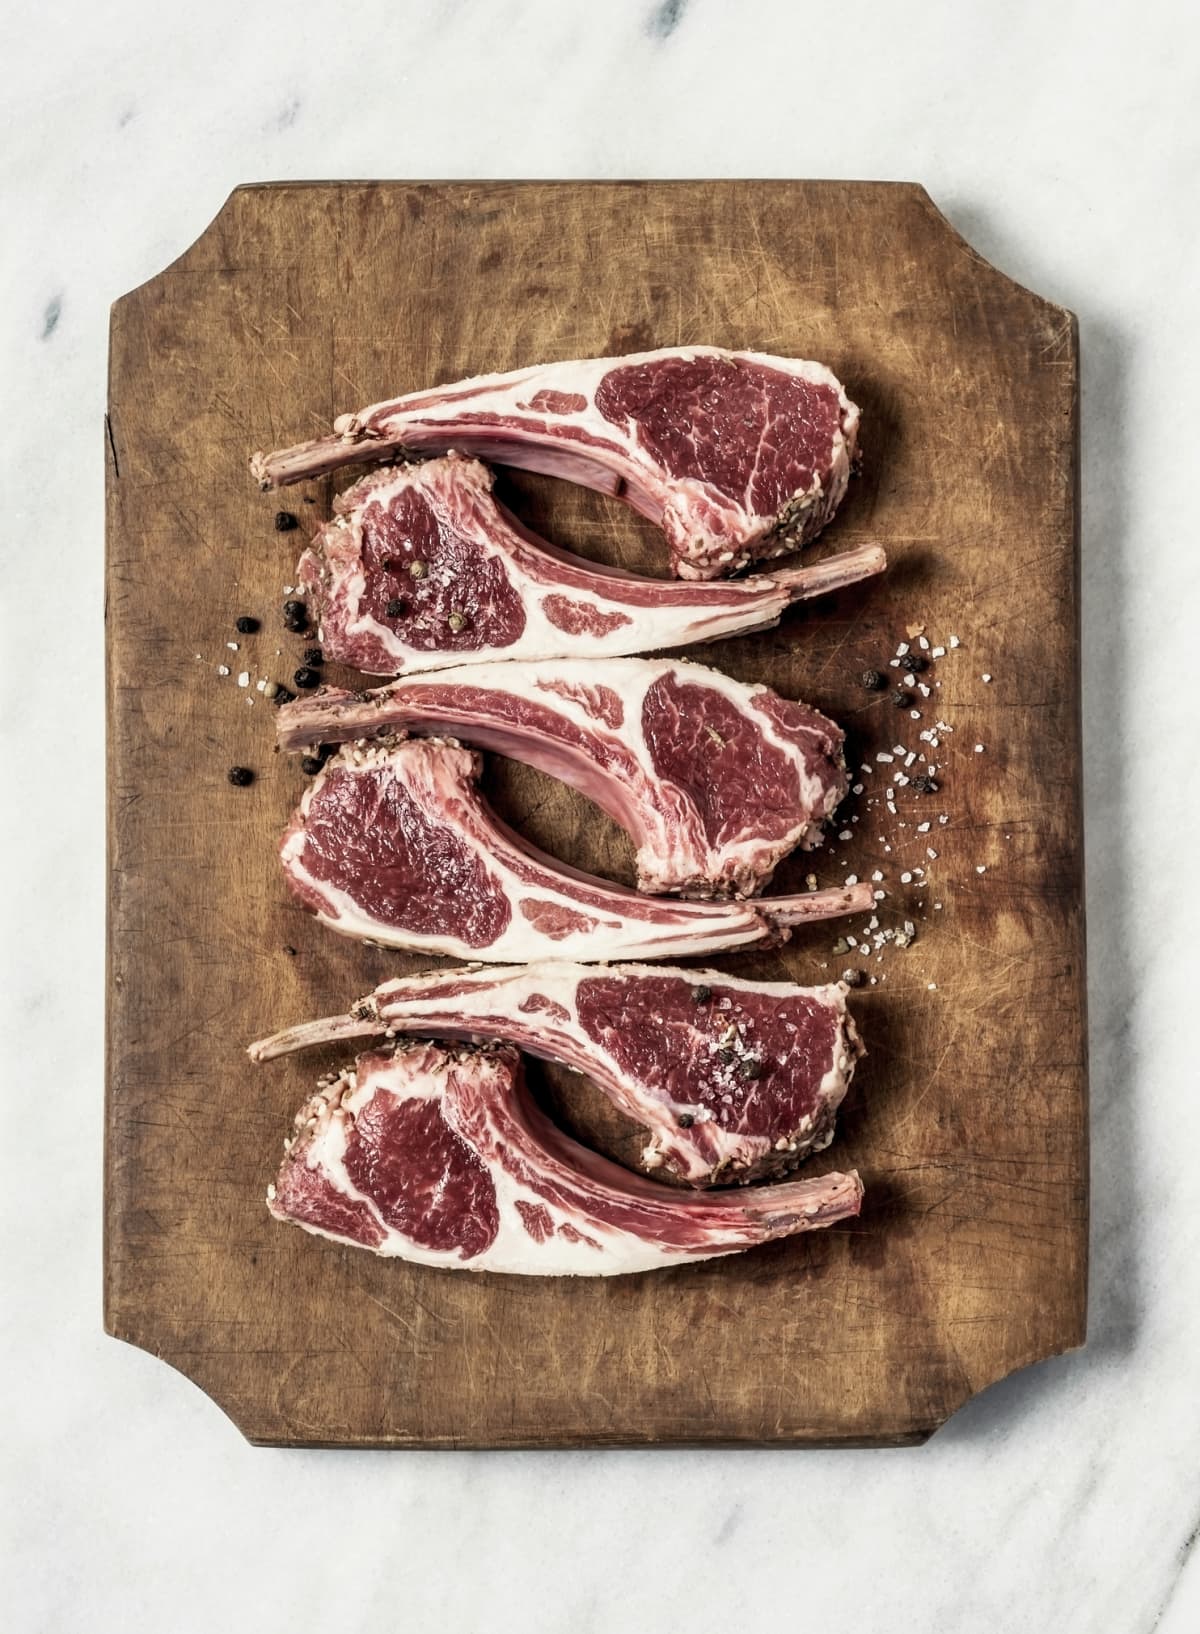 Raw fresh lamb ribs on wooden cutting board on white background